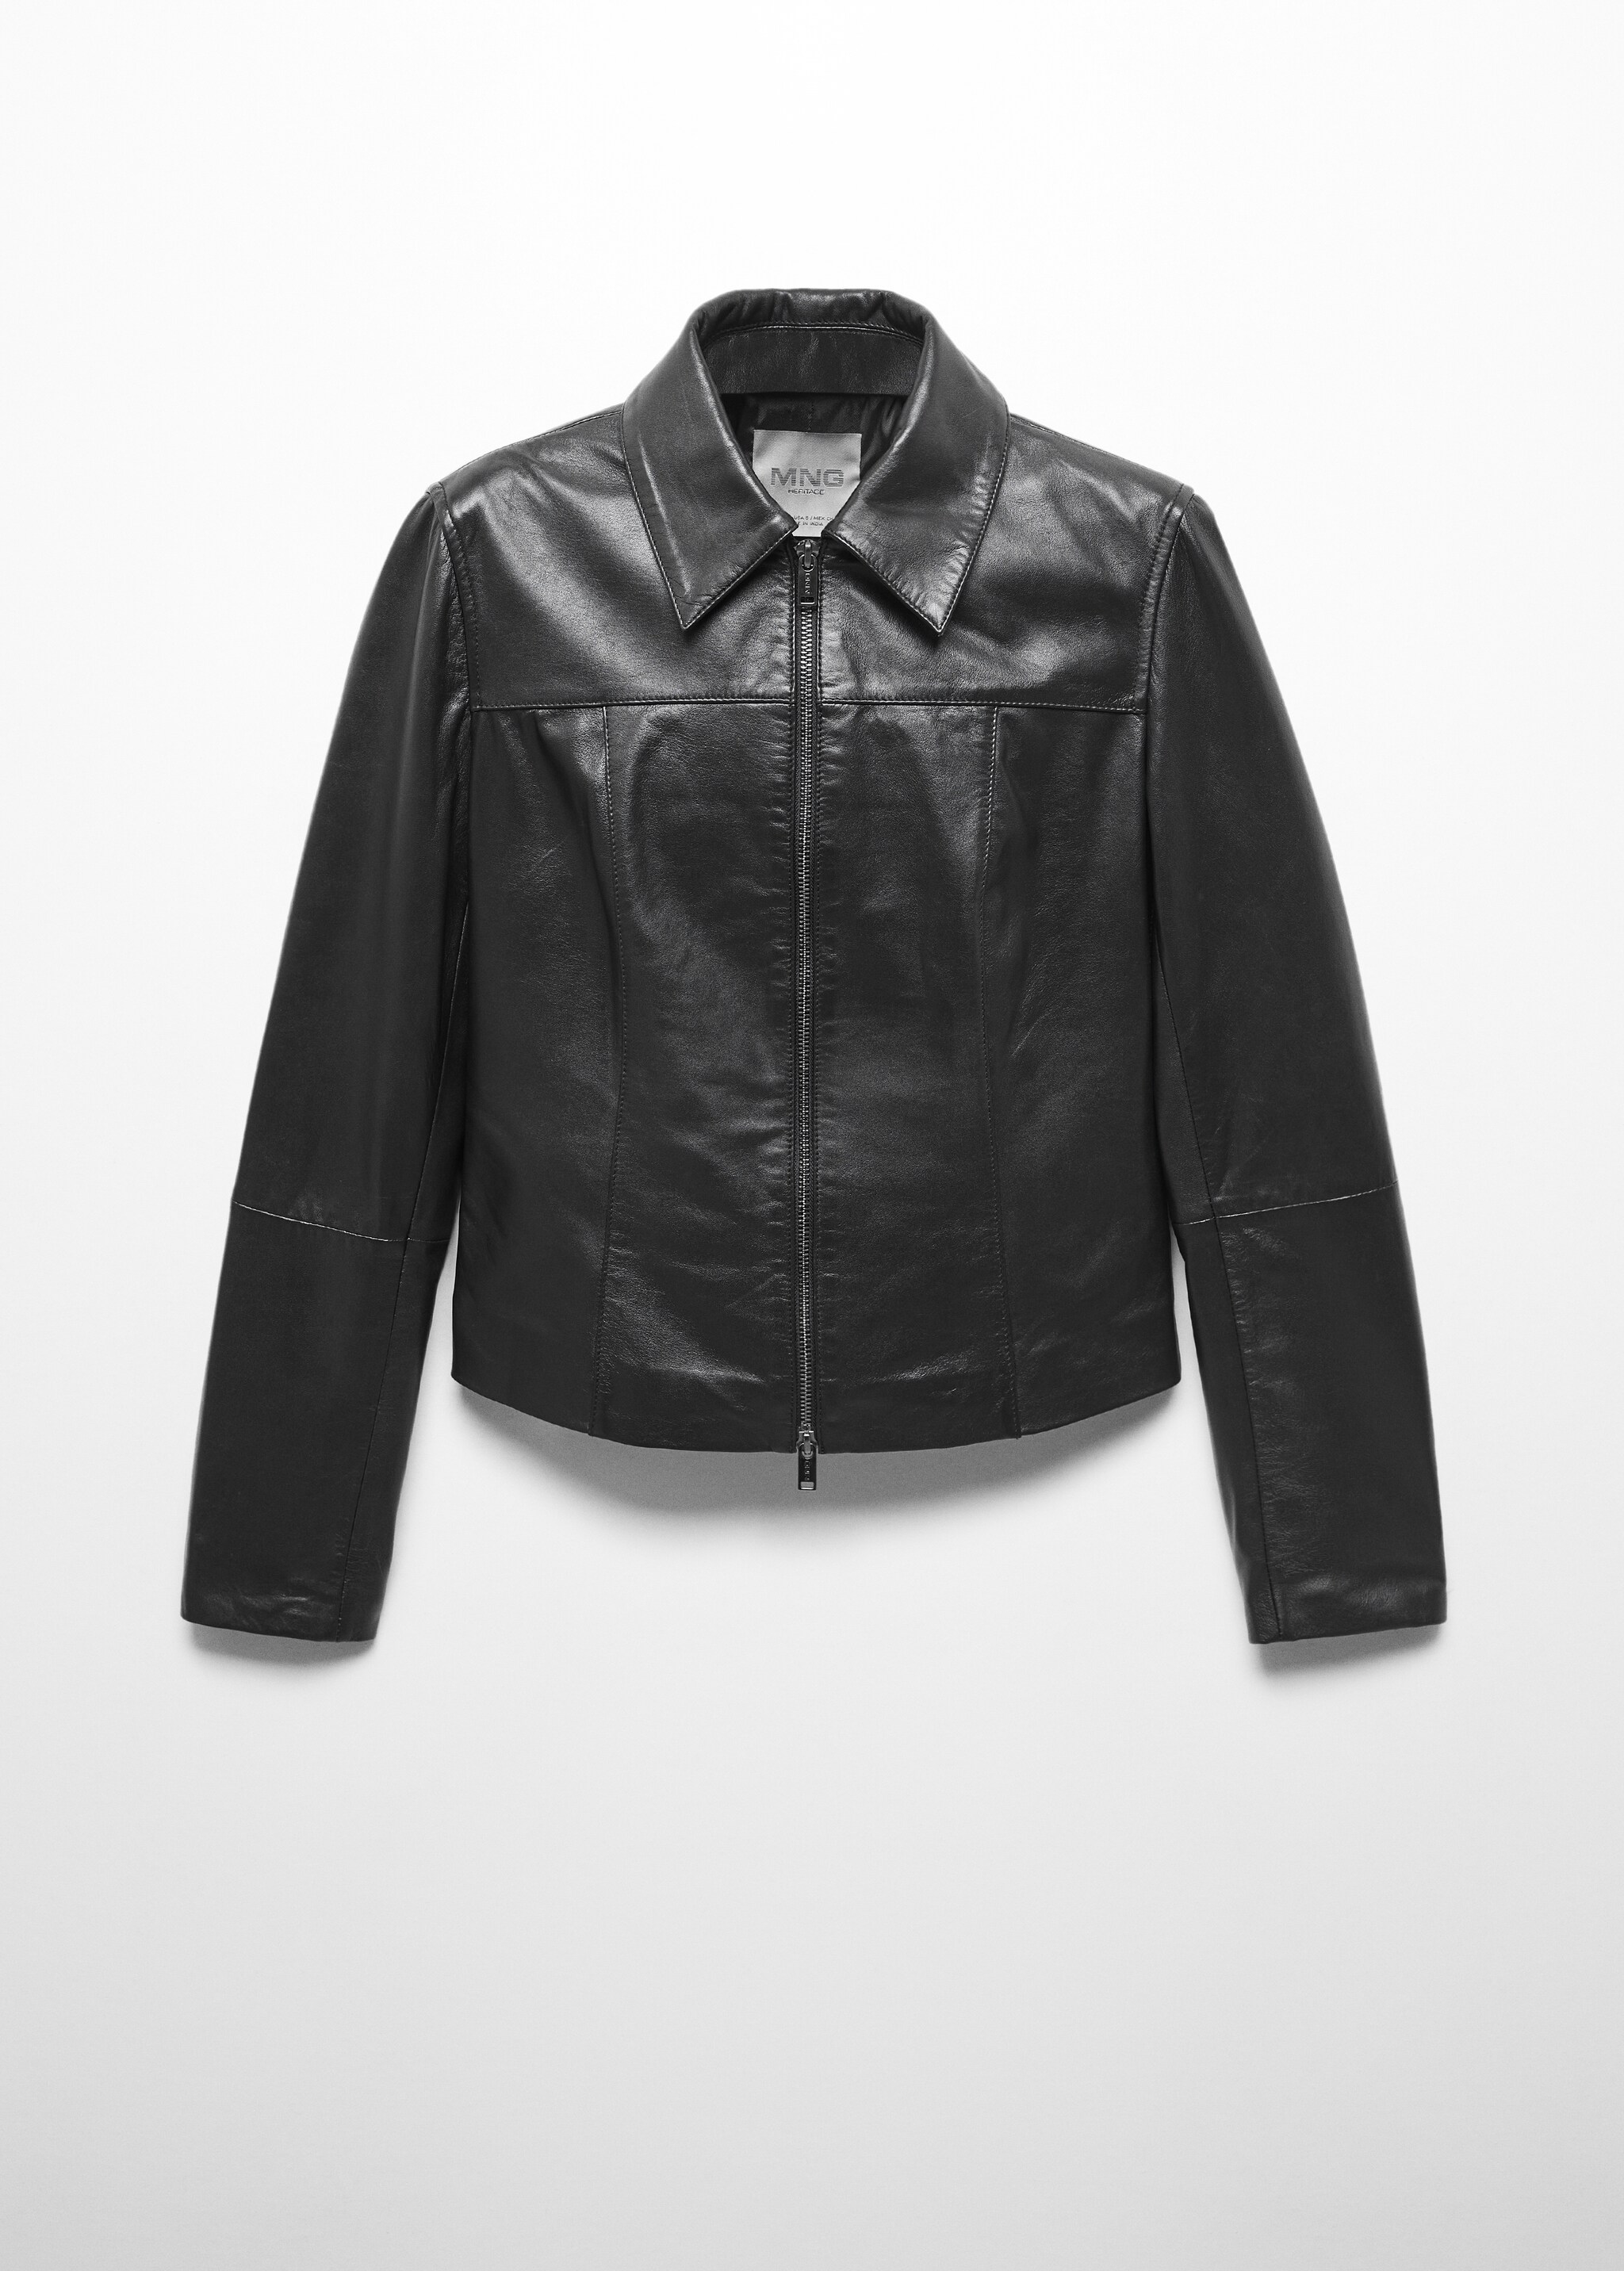 100% leather fitted jacket - Article without model